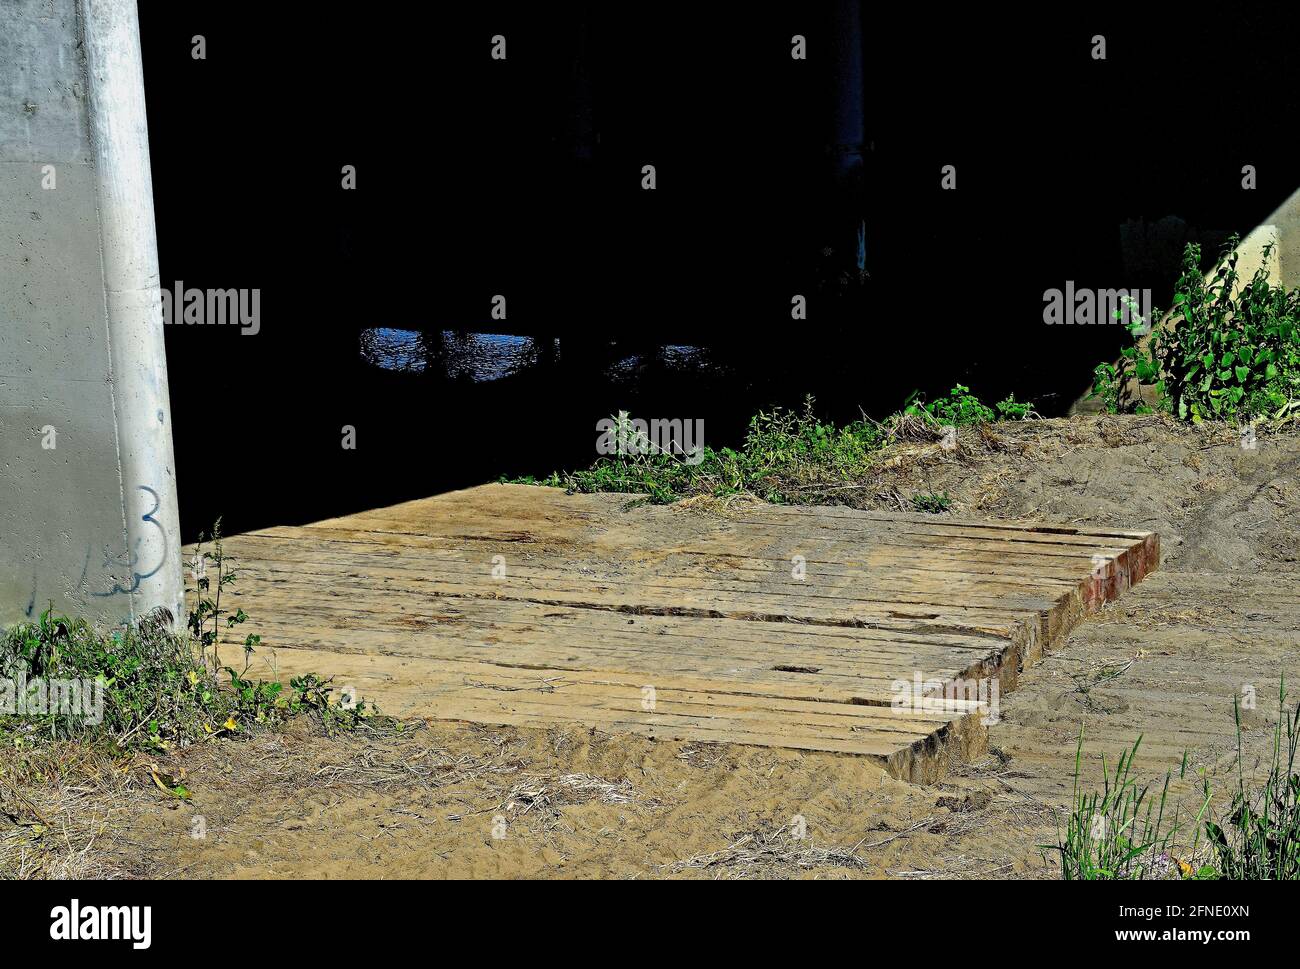 large wooden beams place on the Alameda Creek under the 880 freeway overpass in Union City, California Stock Photo